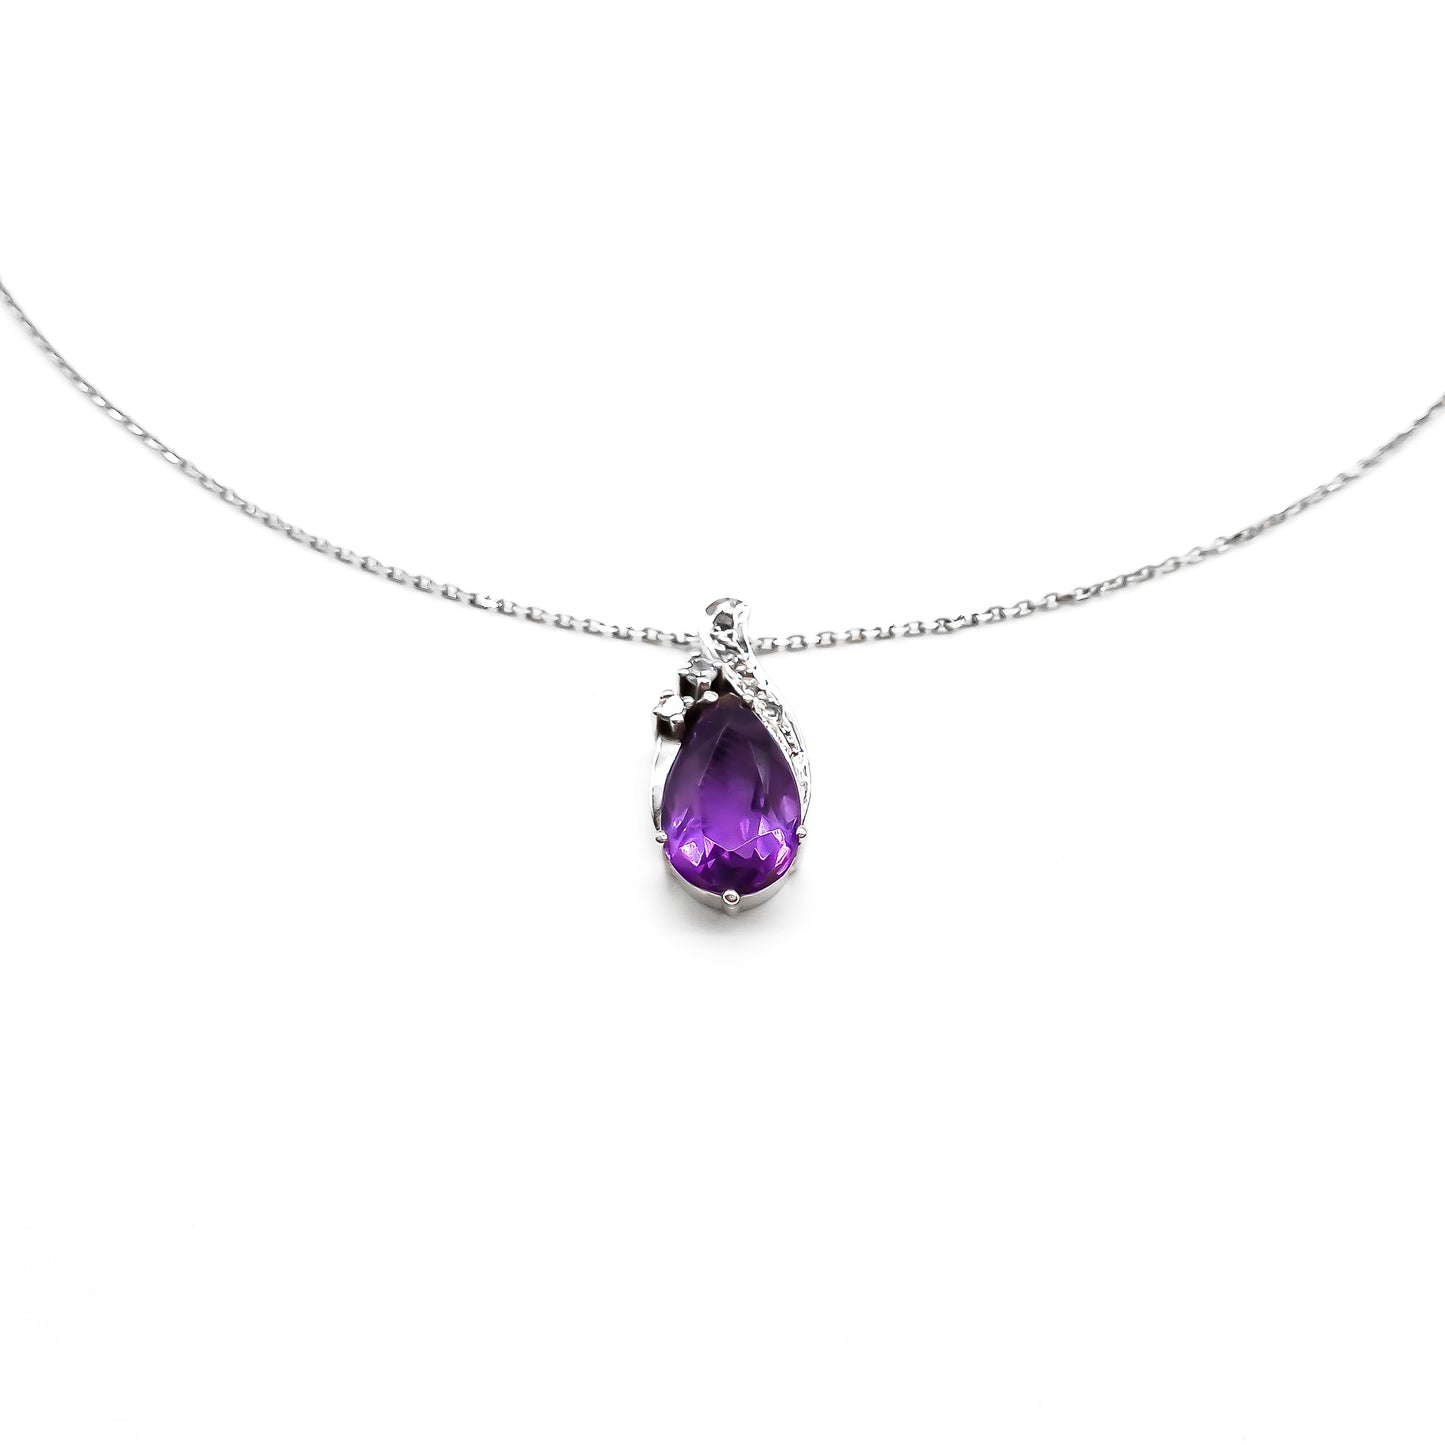 Dainty 18ct white gold diamond pendant set with a deep purple pear-cut amethyst on an 18ct white gold chain.